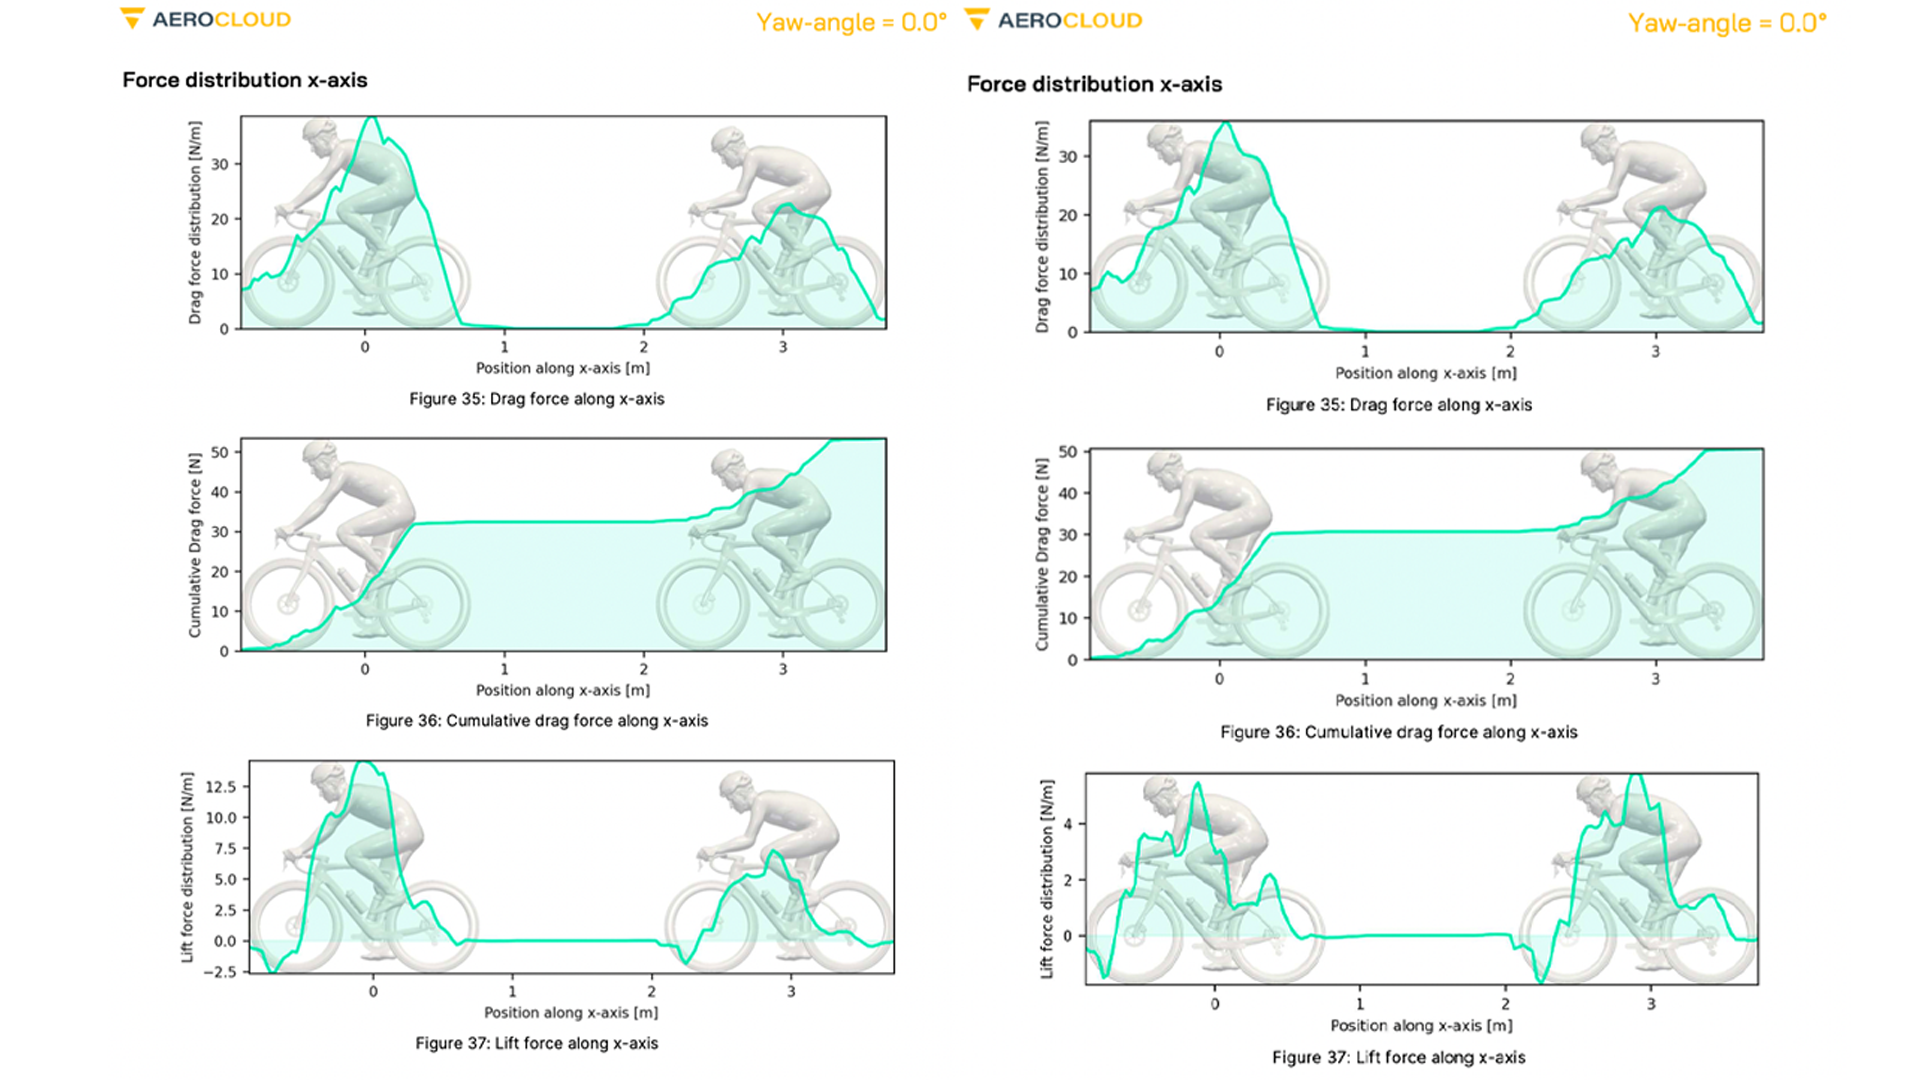 The image shows the force distribution for two cyclists based on CfD results for a simulation analysing the drag experienced by a following rider